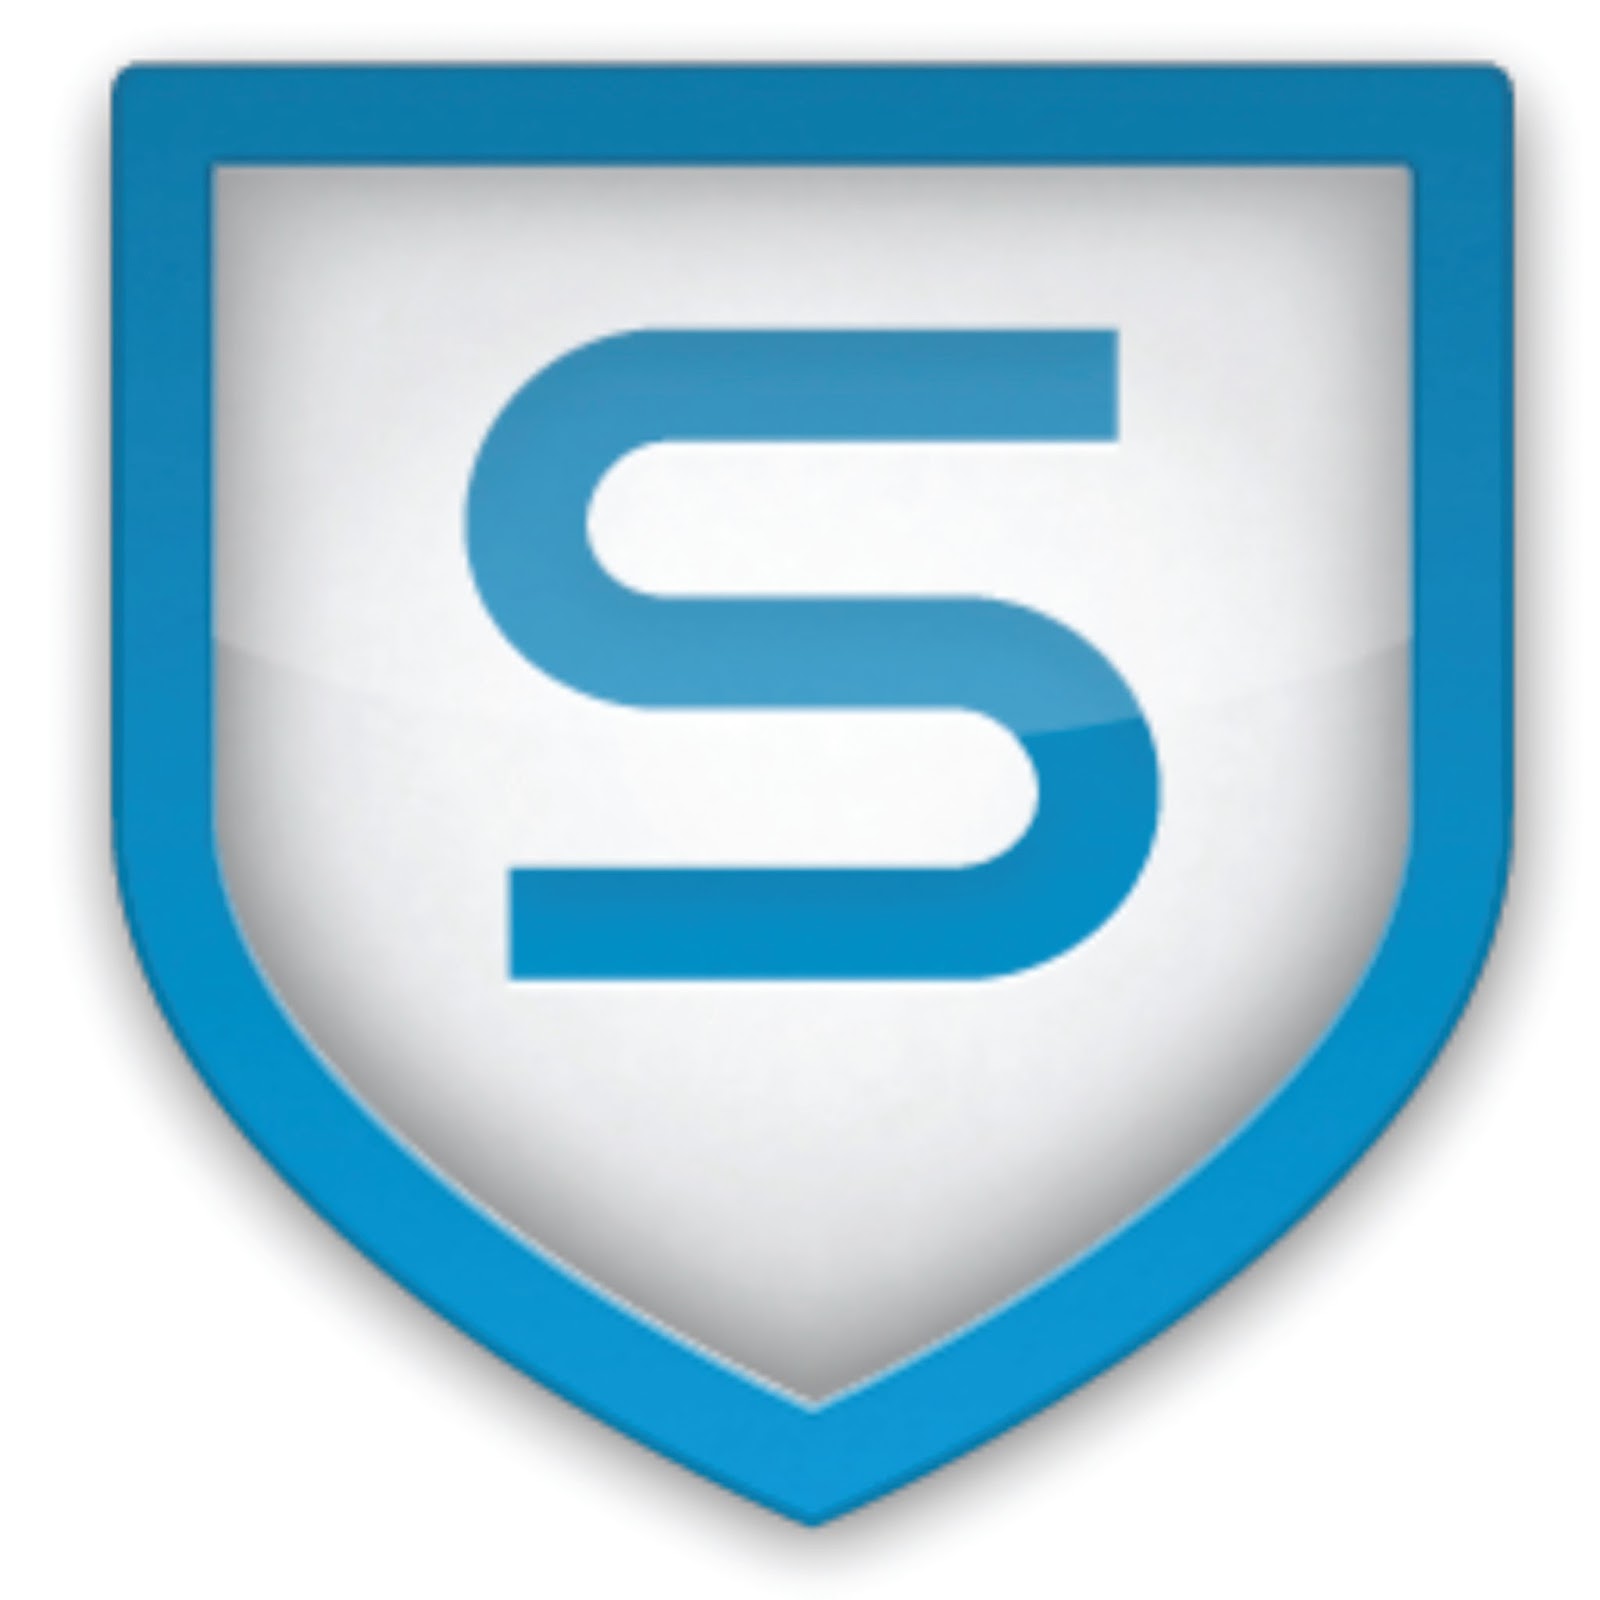 Sophos antivirus for mac home edition free download